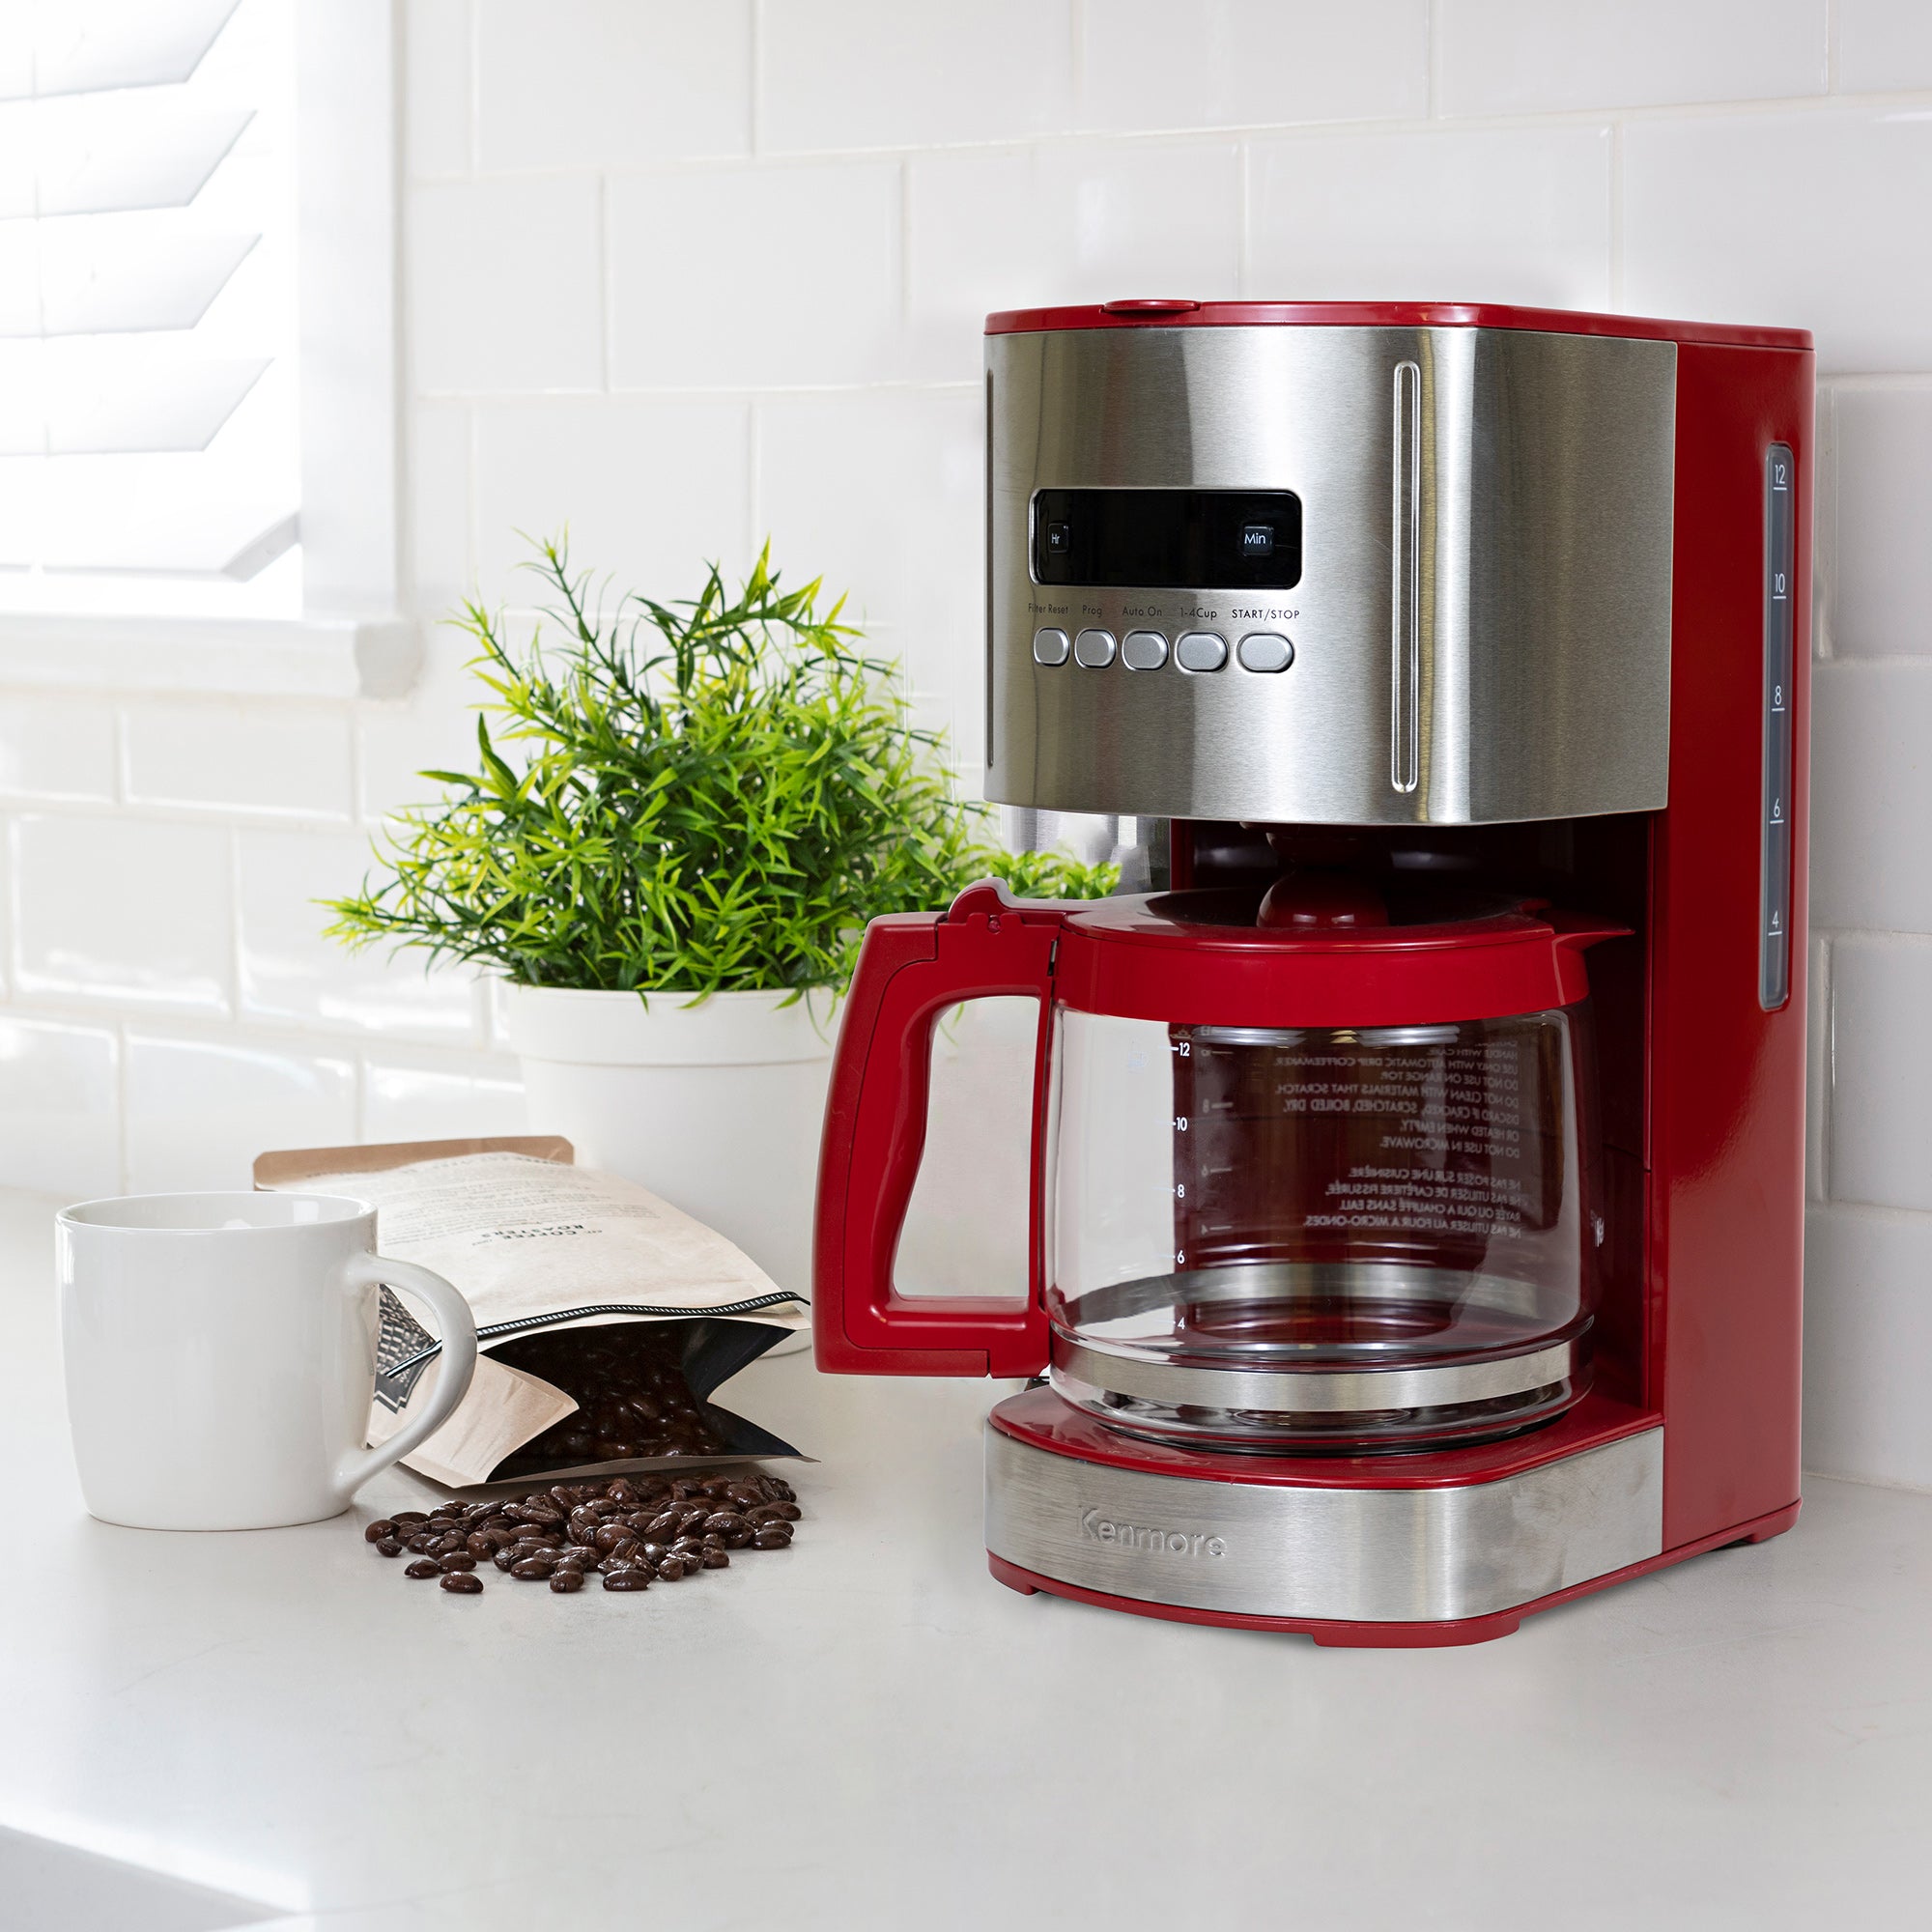 Kenmore 12 cup programmable coffeemaker on a light gray countertop with white tile backsplash behind and a mug, bag of coffee beans, and potted plant beside it